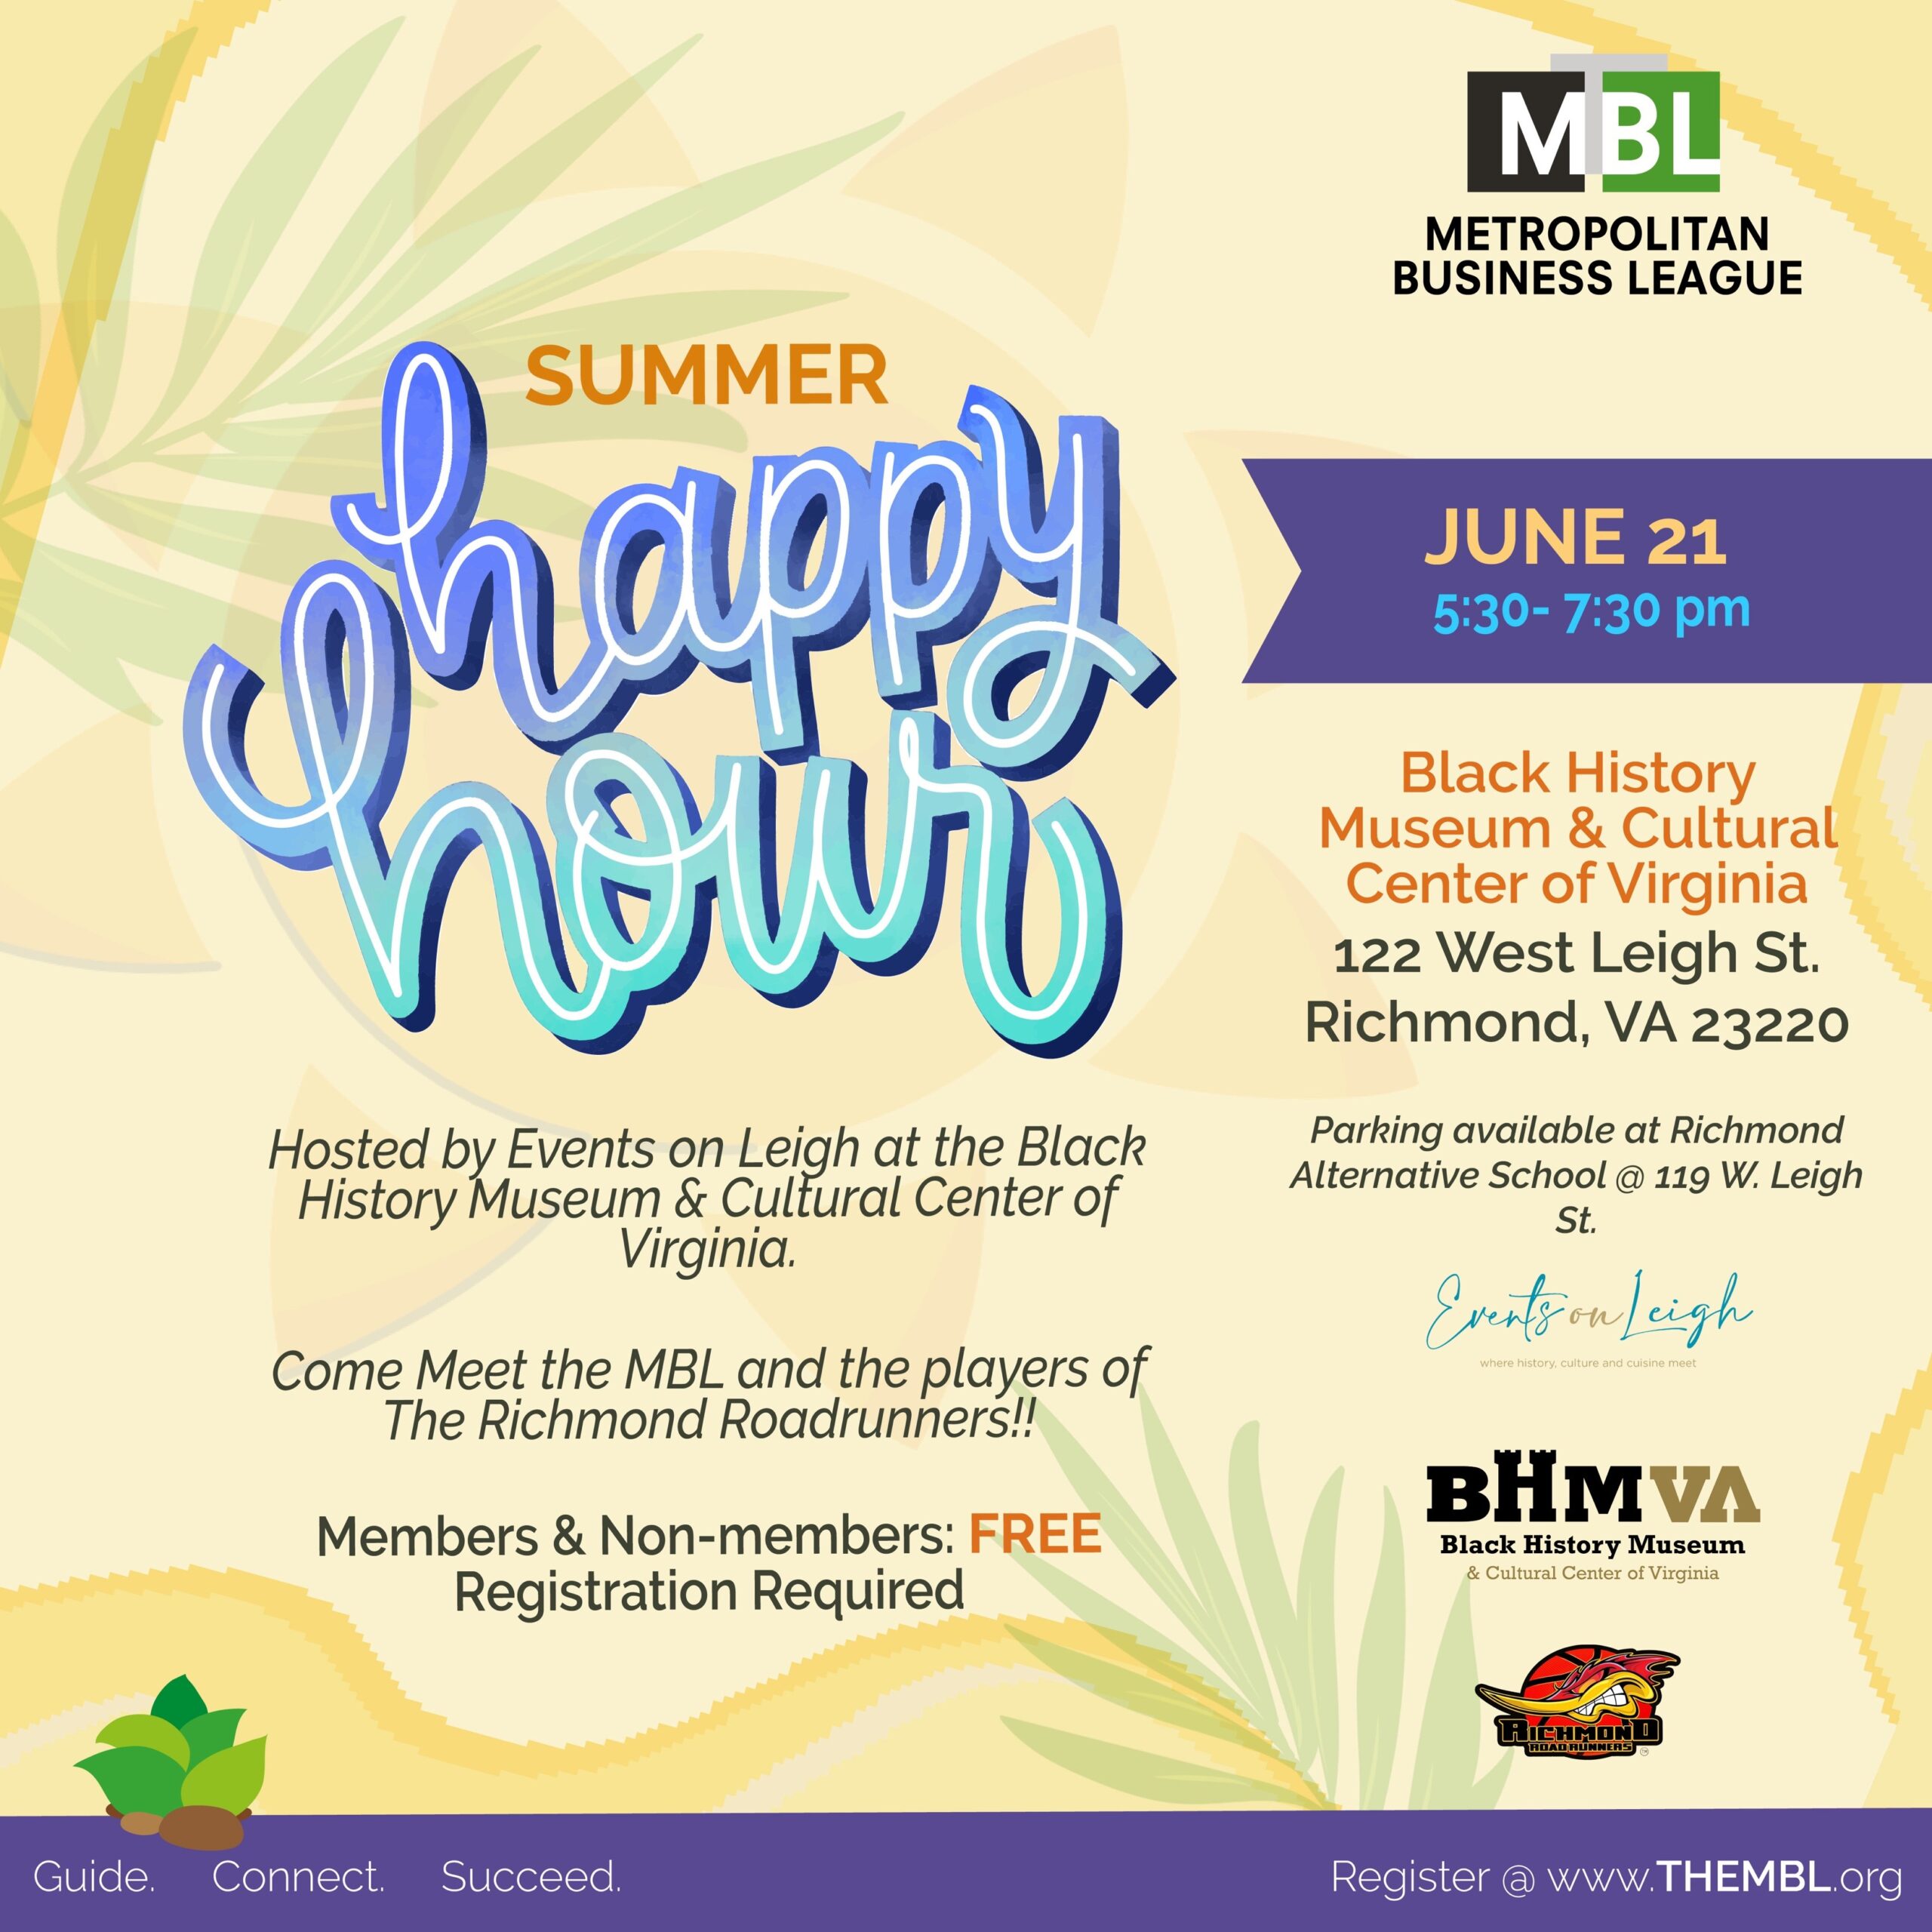 MBL Summer Happy Hour